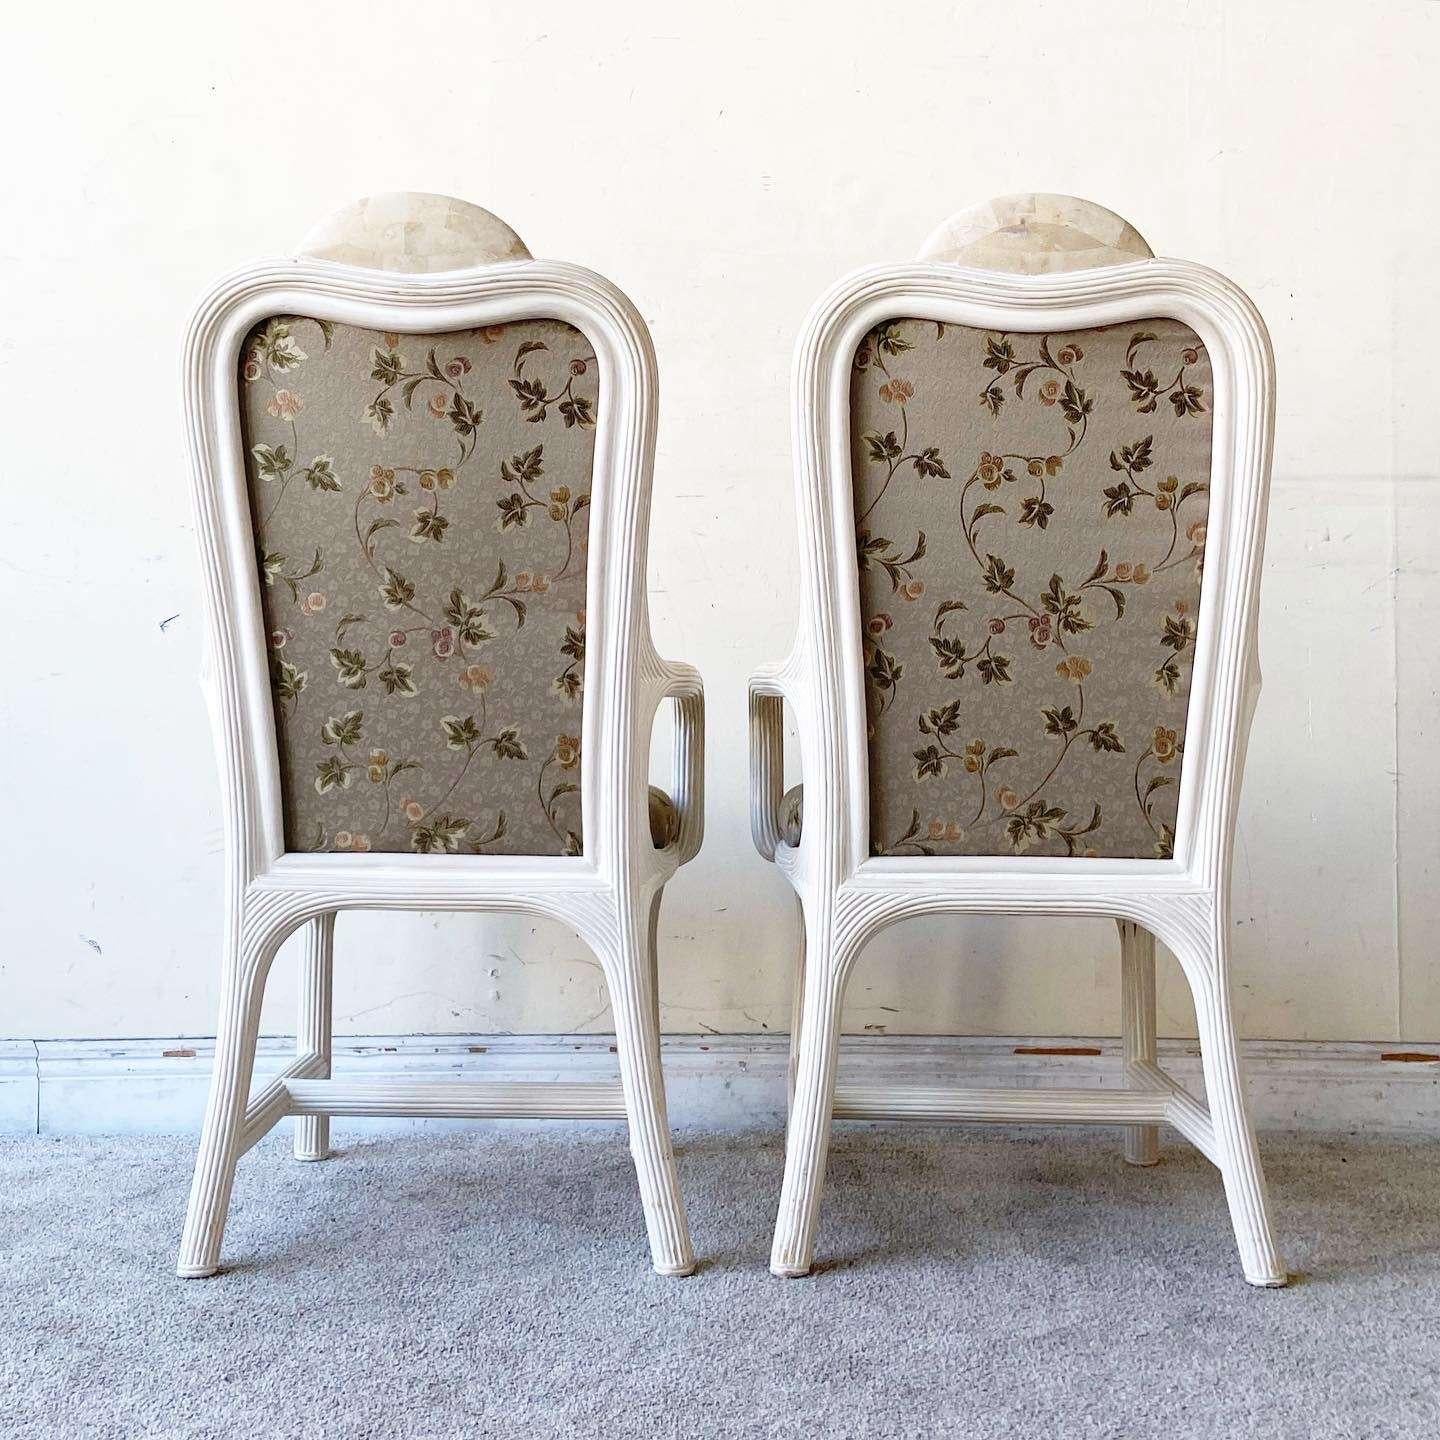 Boho Chic Pencil Reed and Tessellated Stone Dining Chairs In Good Condition For Sale In Delray Beach, FL